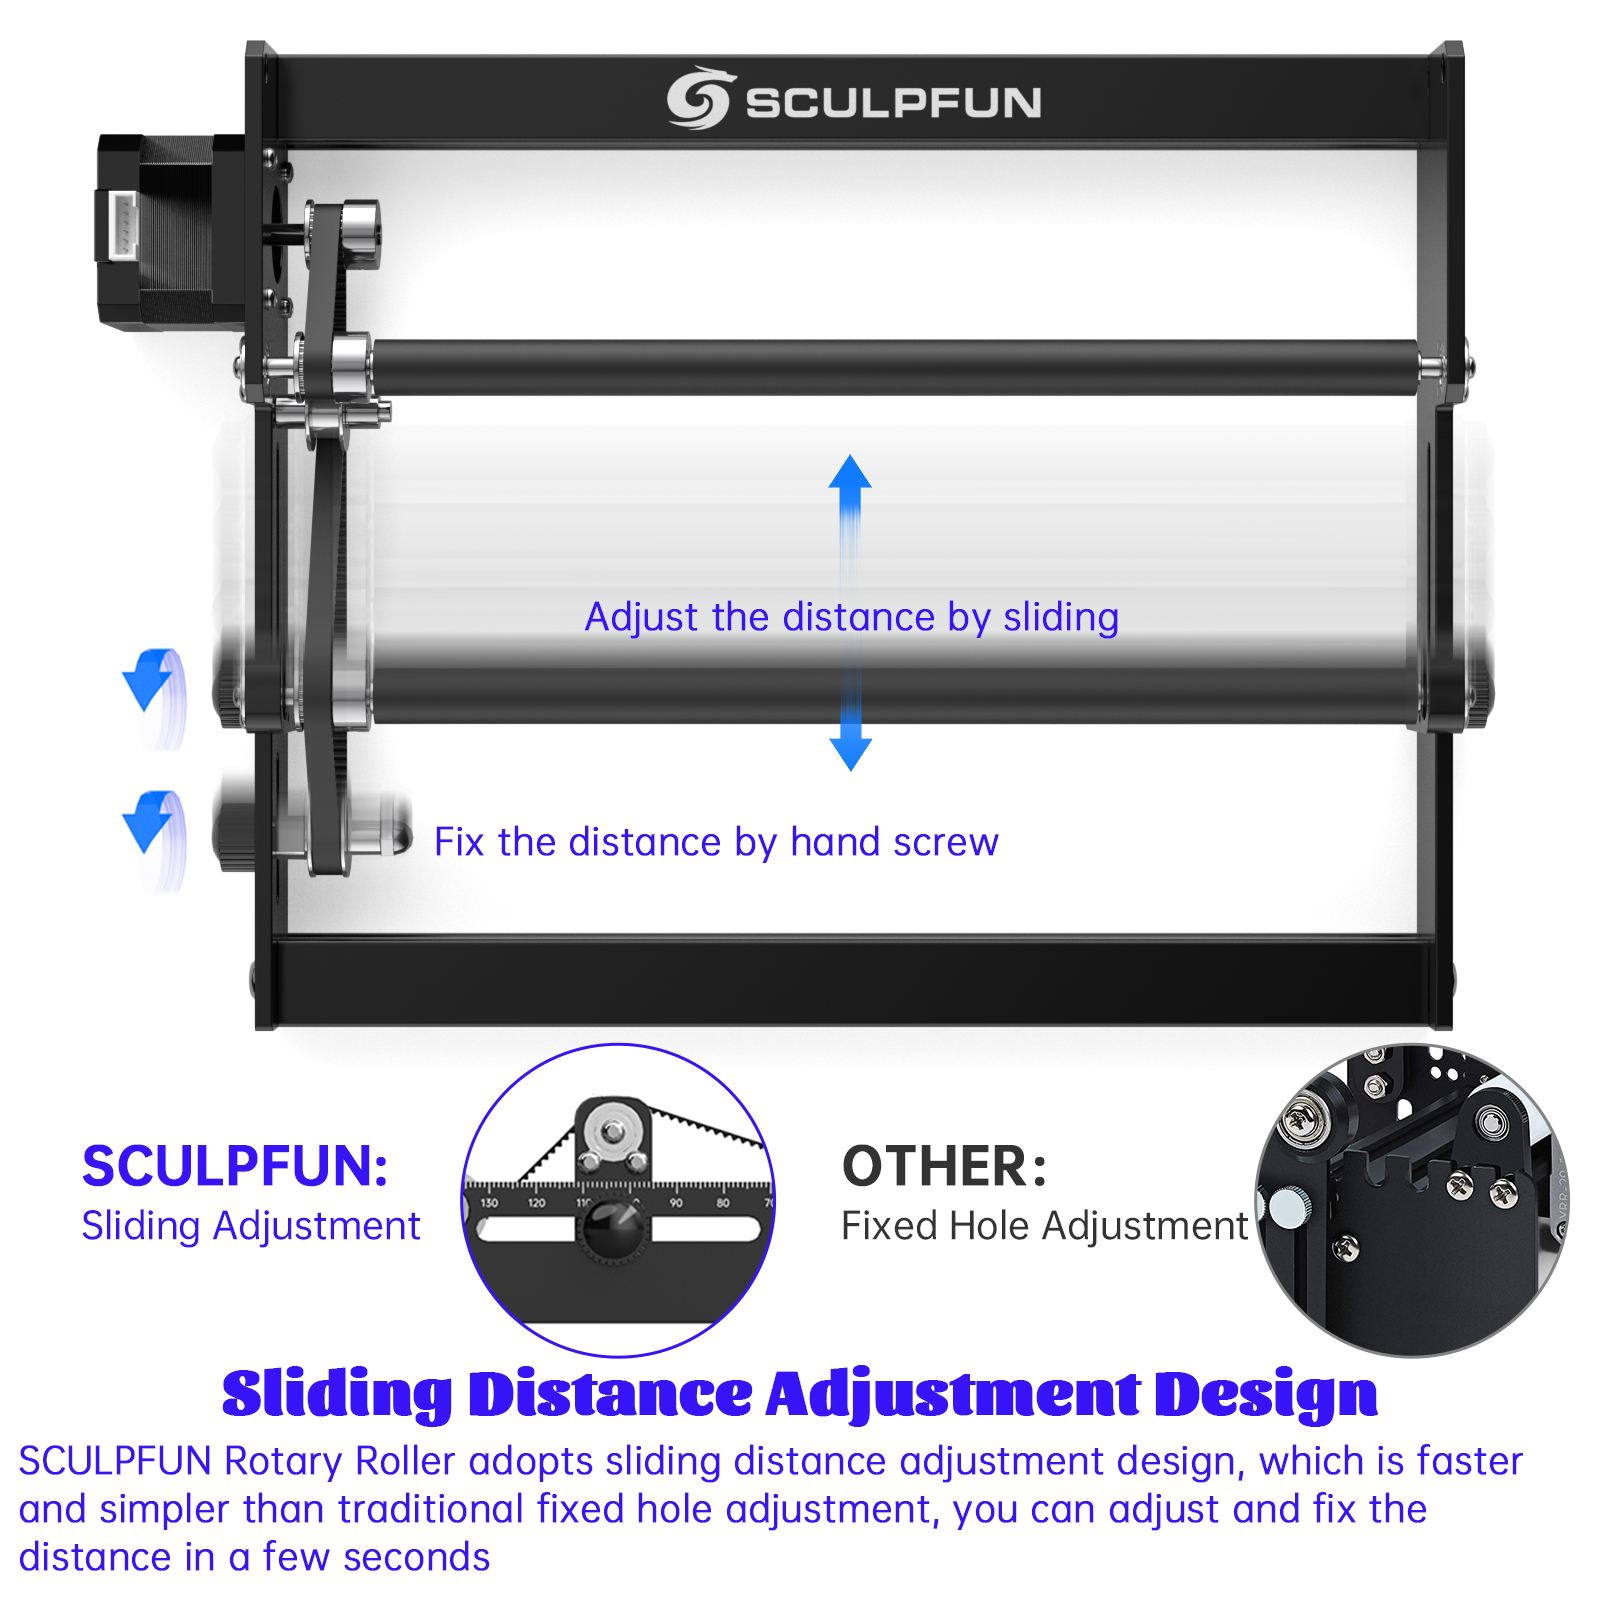 SCULPFUN Laser Rotary Roller for S9 Laser Engraver Y-axis Roller 360 degree Rotating for 6-150mm Engraving Diameter 4 raise feet for Cylindrical Objects fit S6 S6 PRO